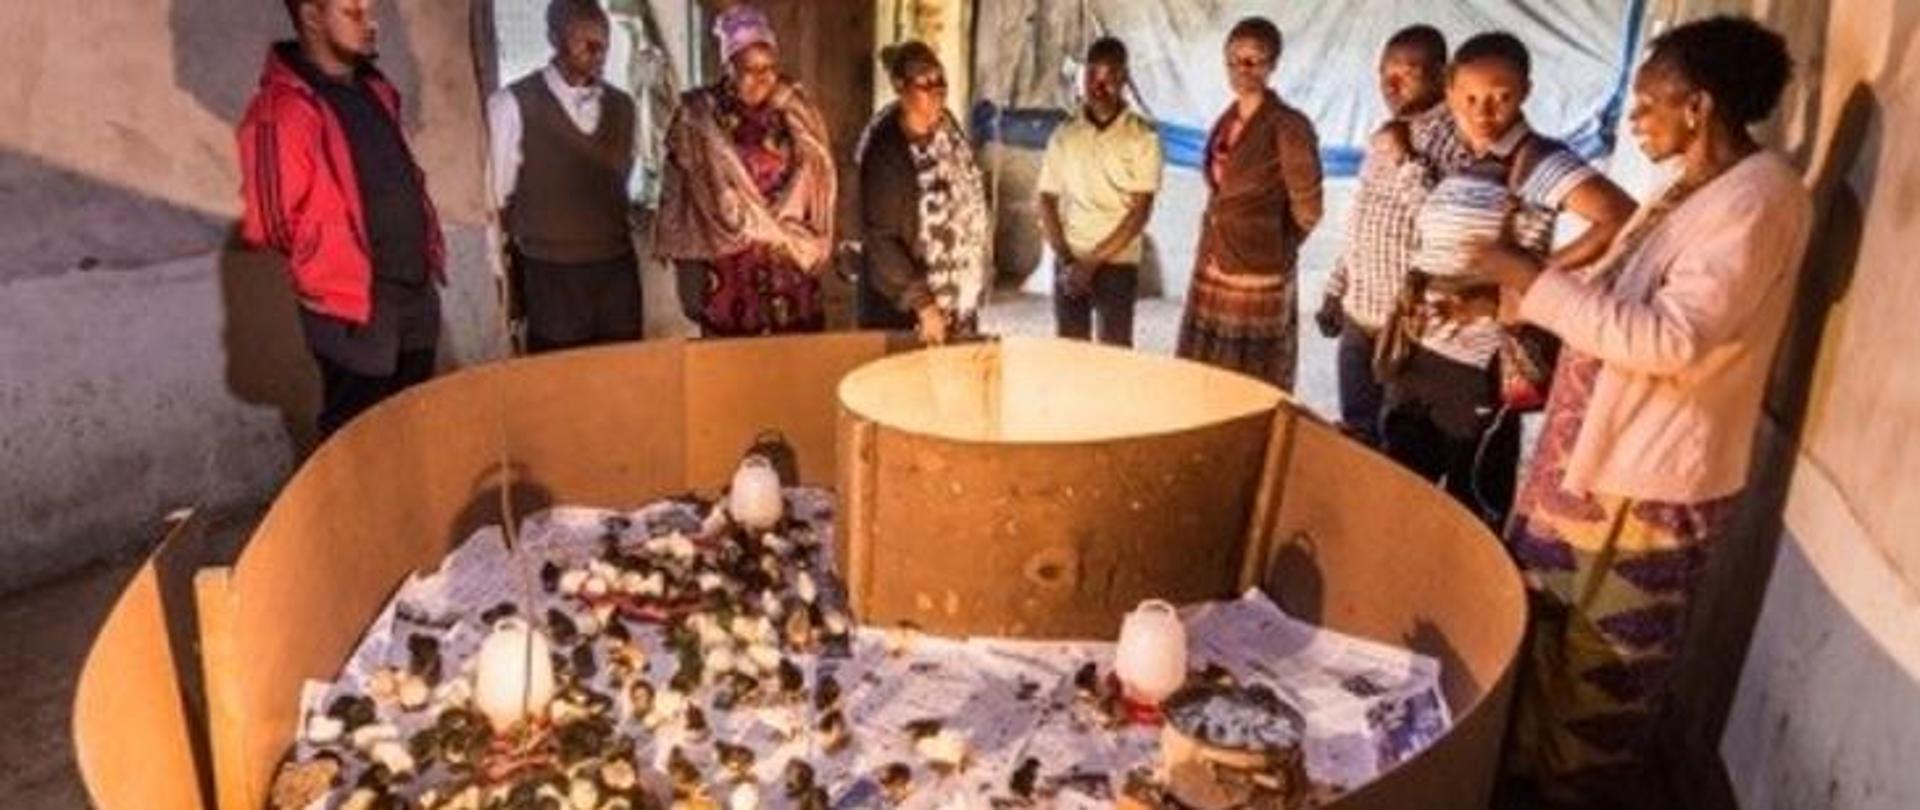 Improving the living conditions of women, orphans and youth by breeding poultry in the Siha district in the Kilimanjaro region
